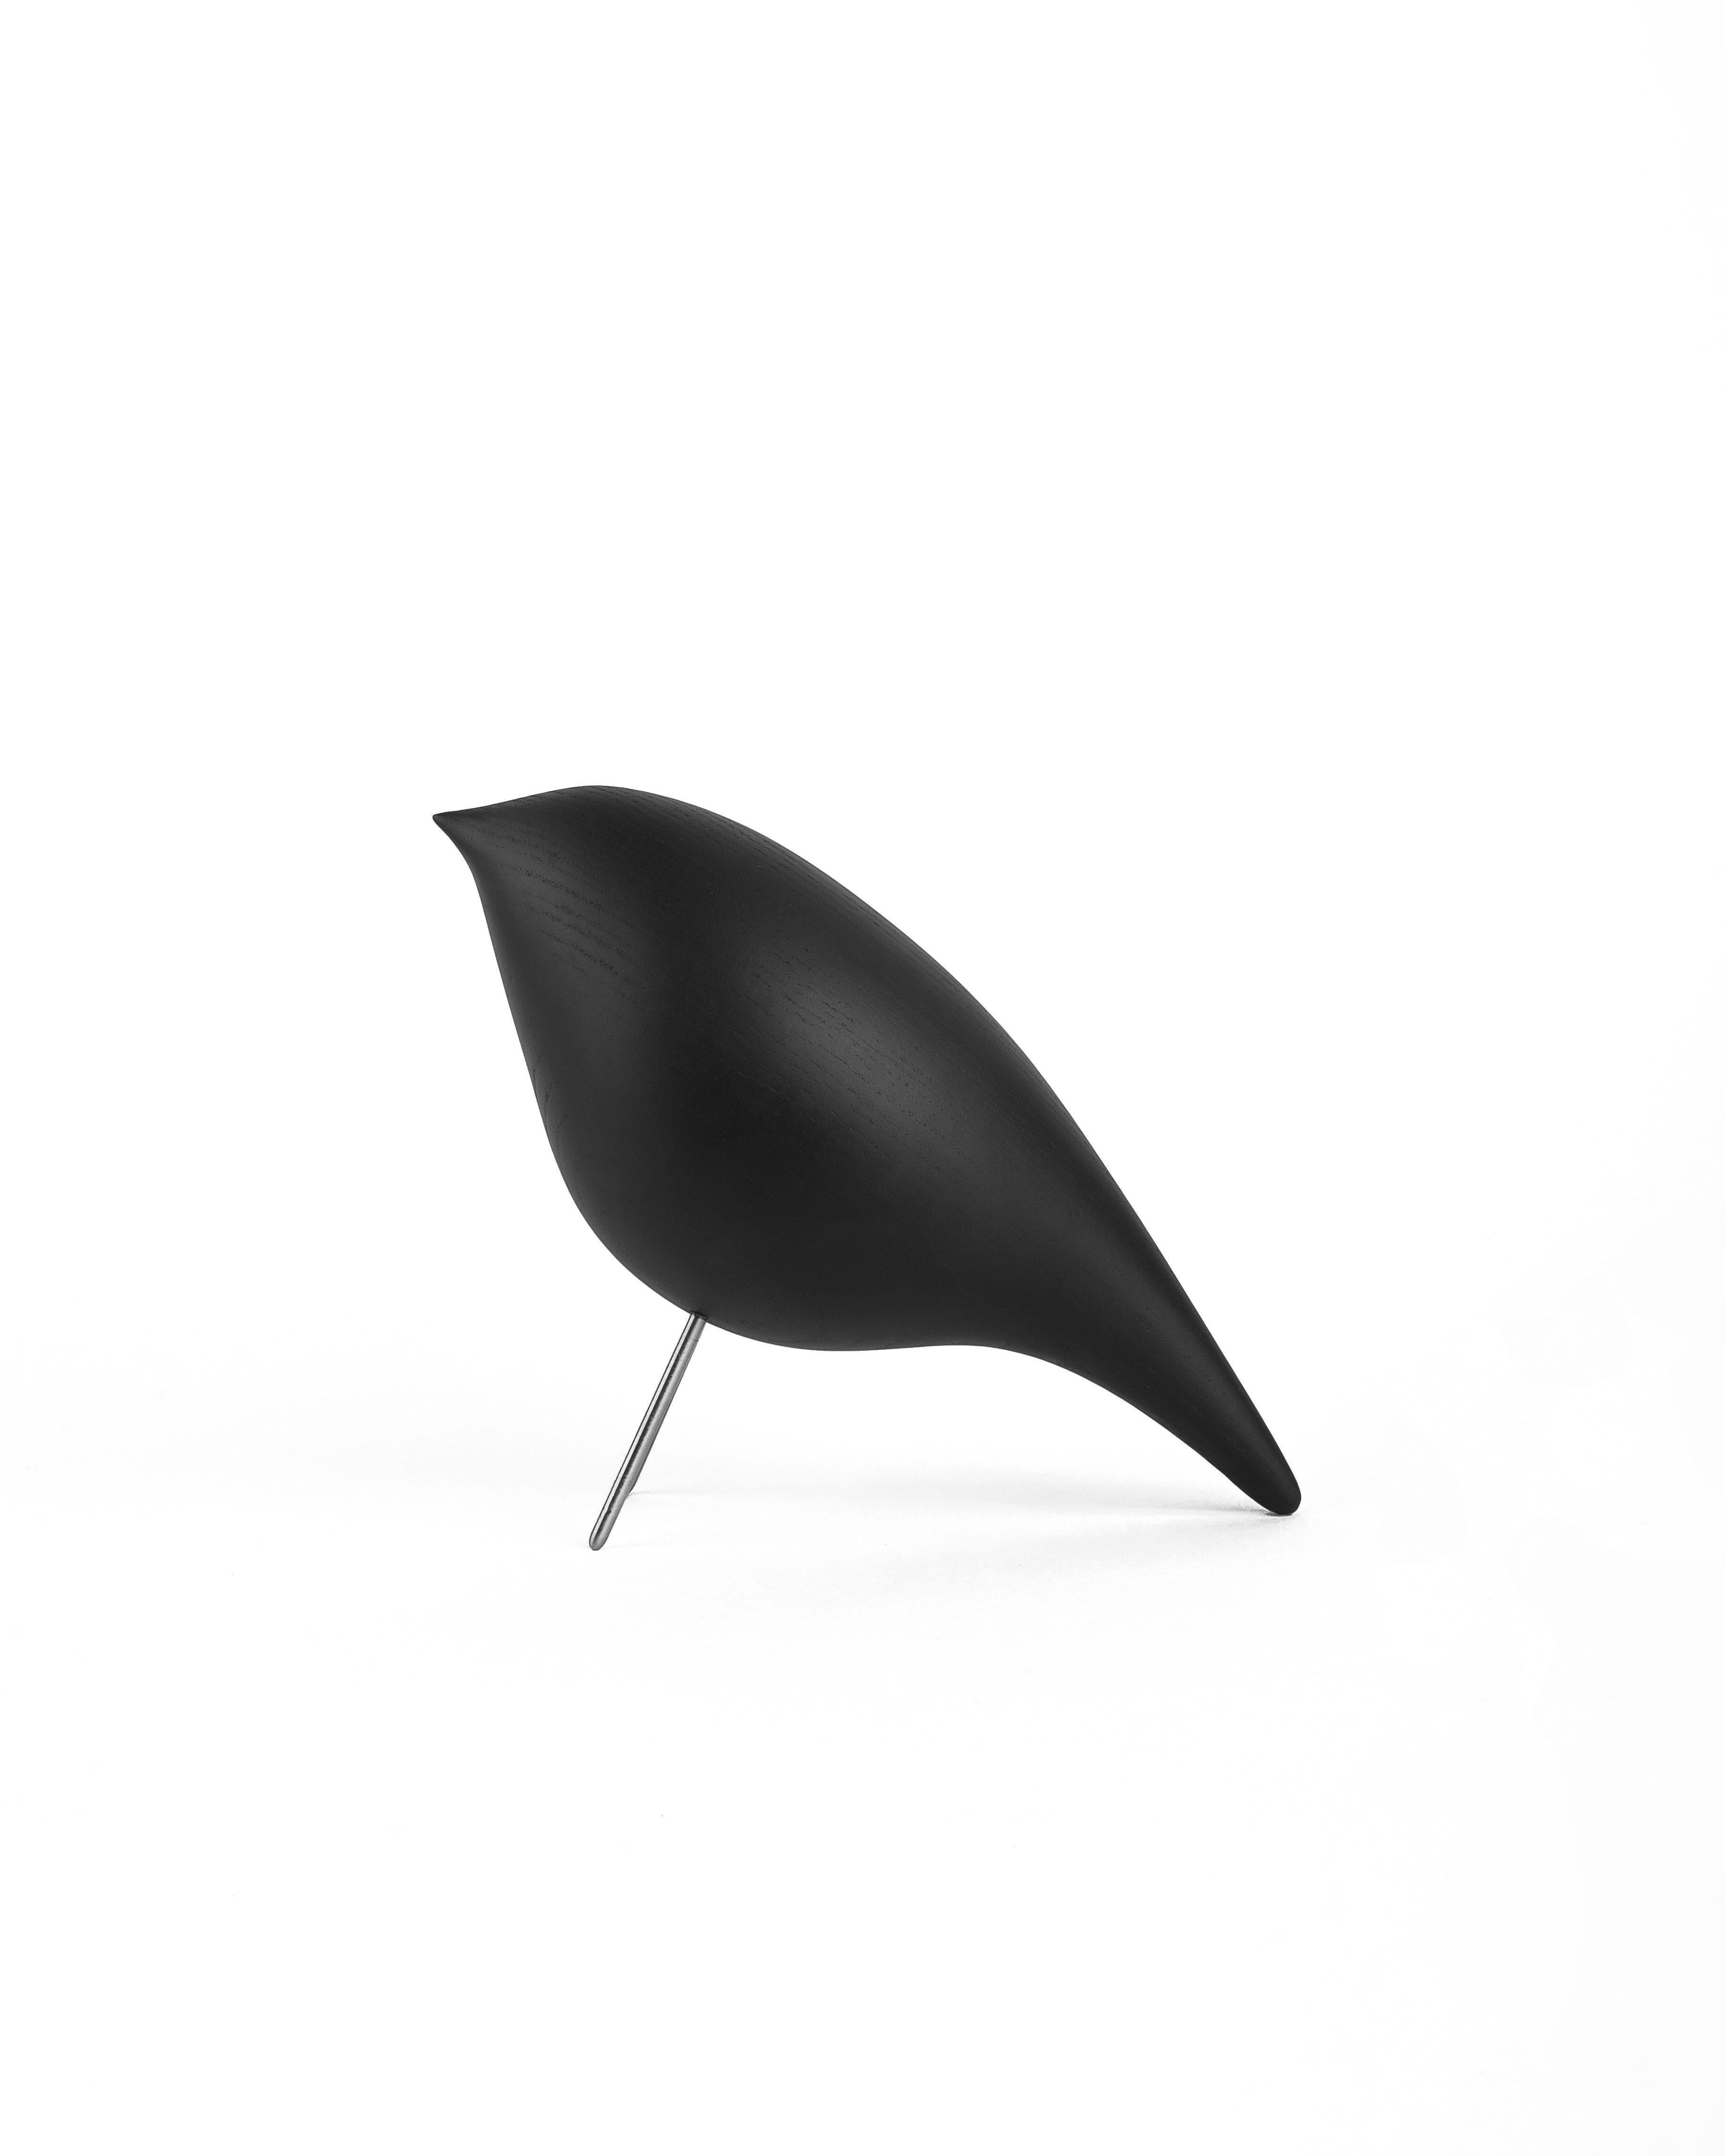 Contemporary 'Tweety Decorative Bird CS3' by Noom, Black Ashwood, In stock For Sale 2